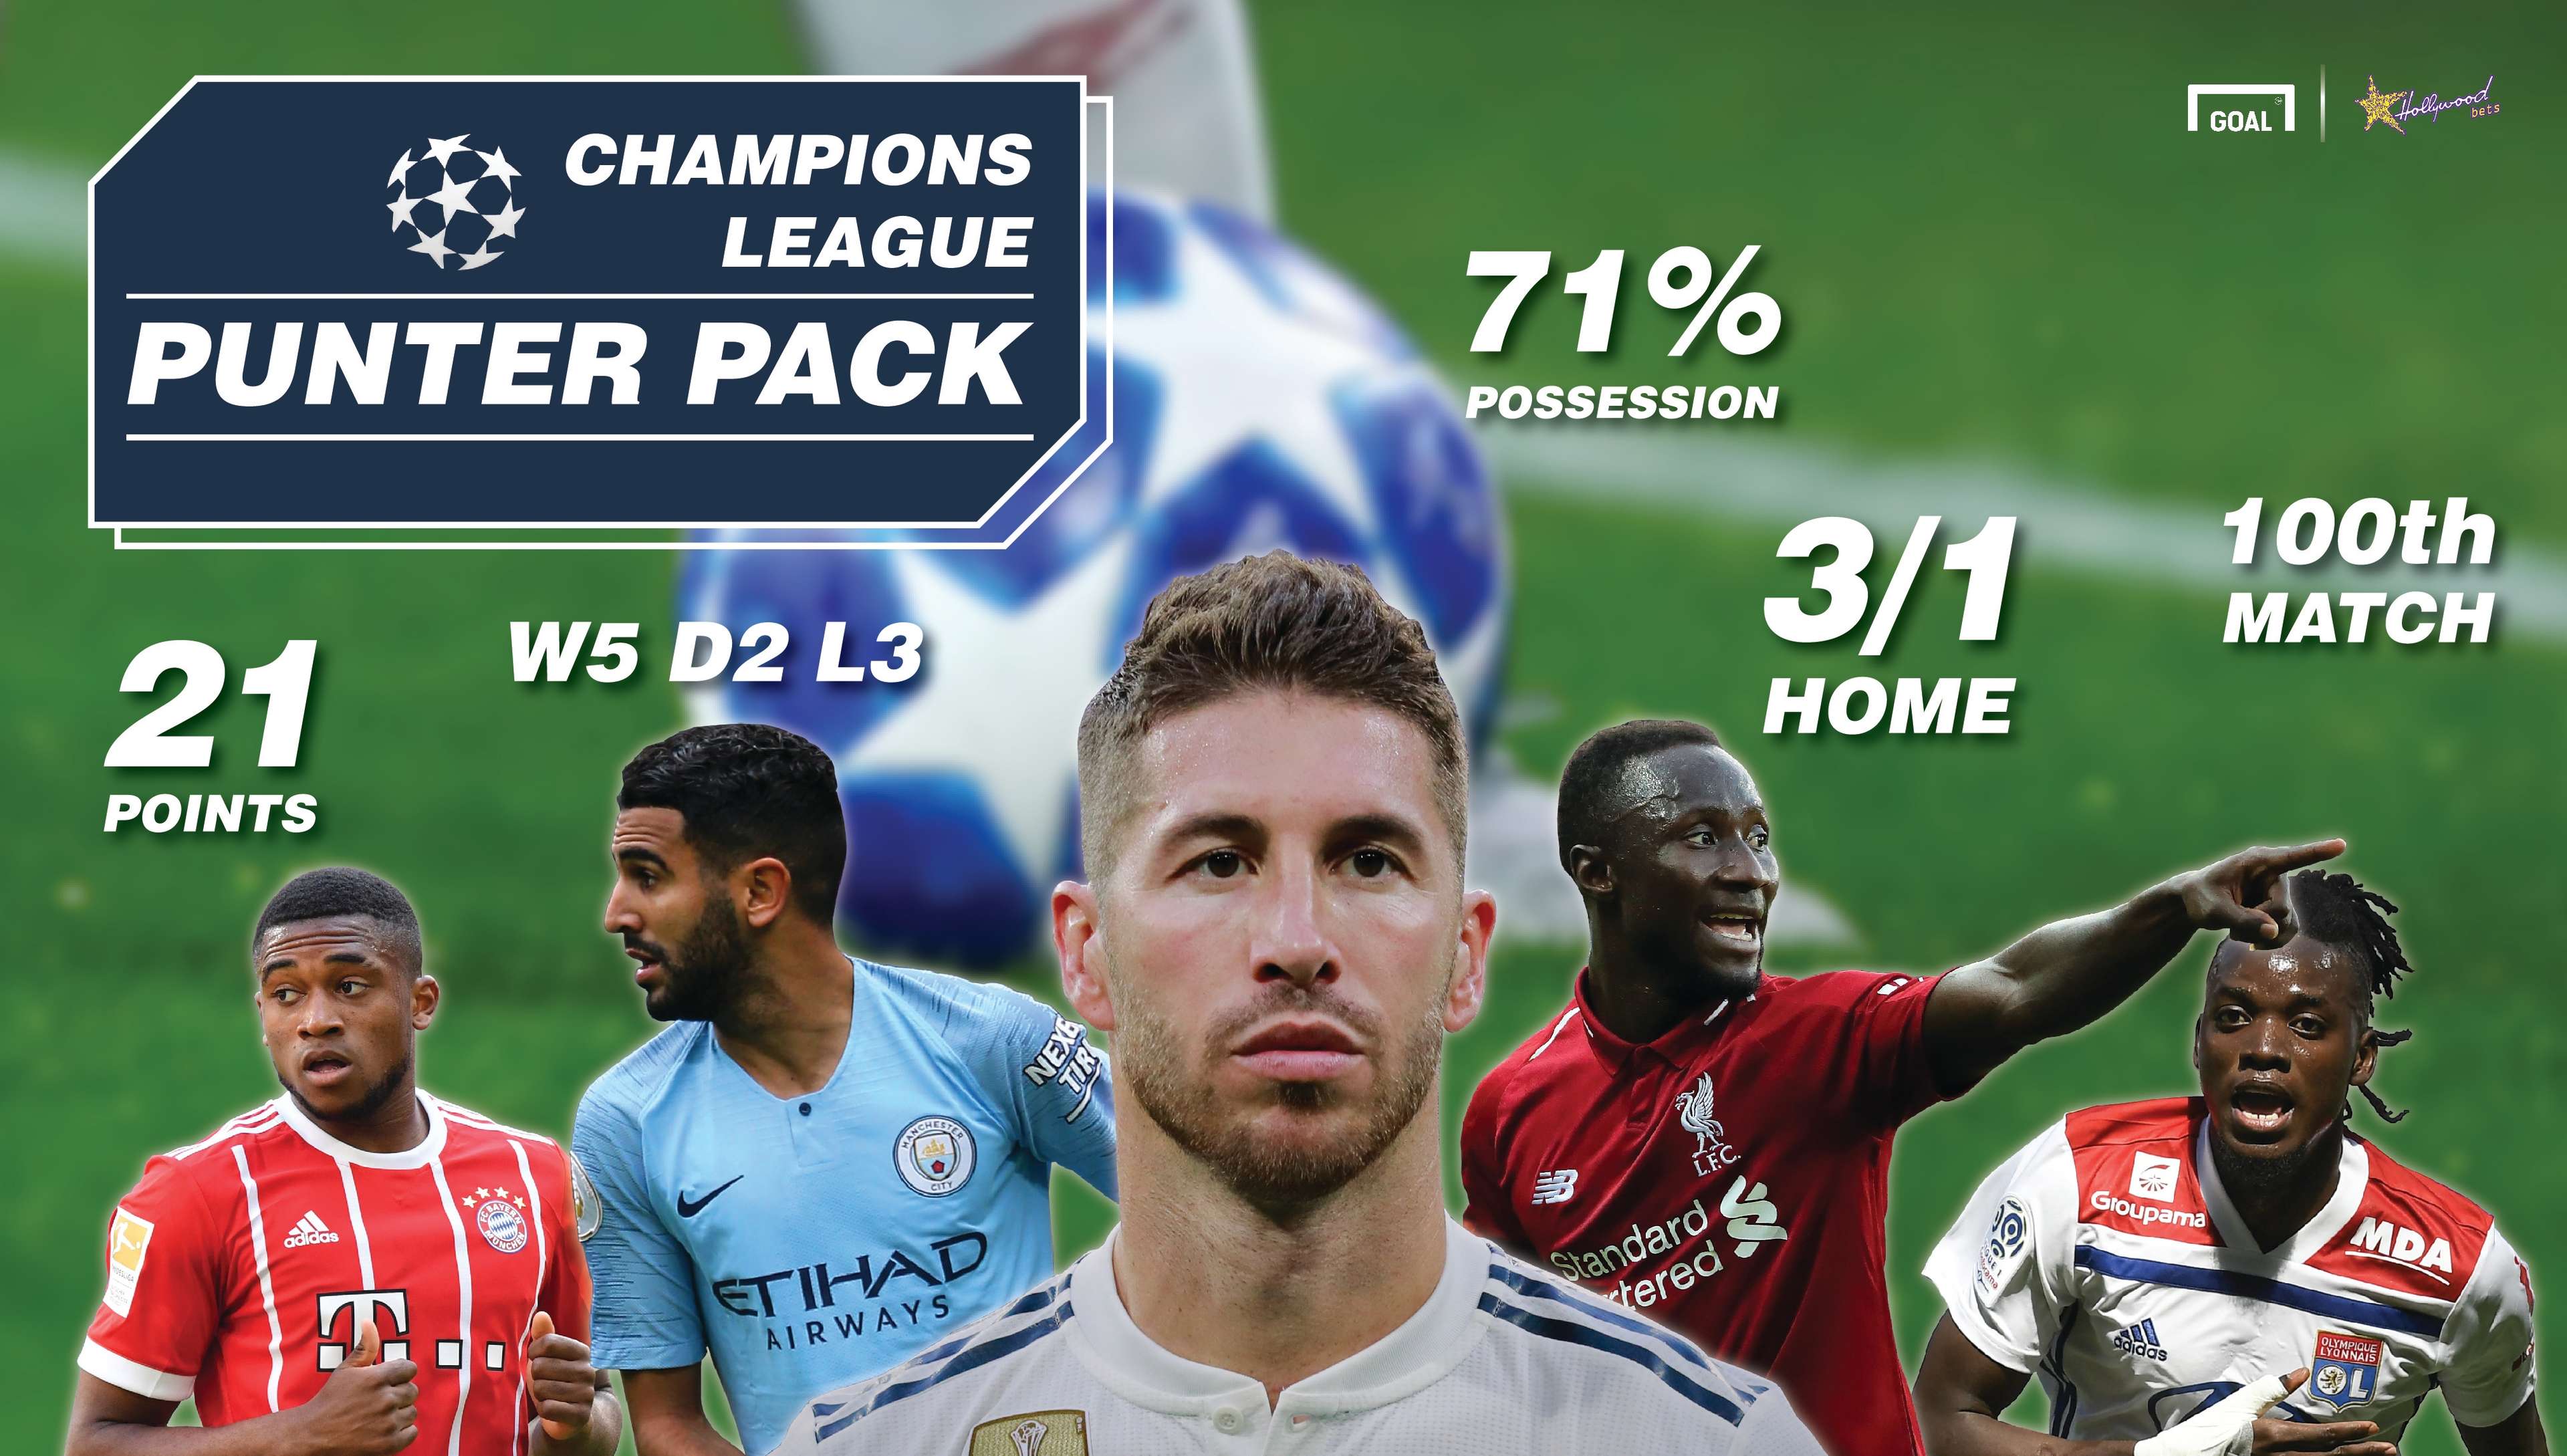 Hollywood bets Punter Pack Uefa Champions League